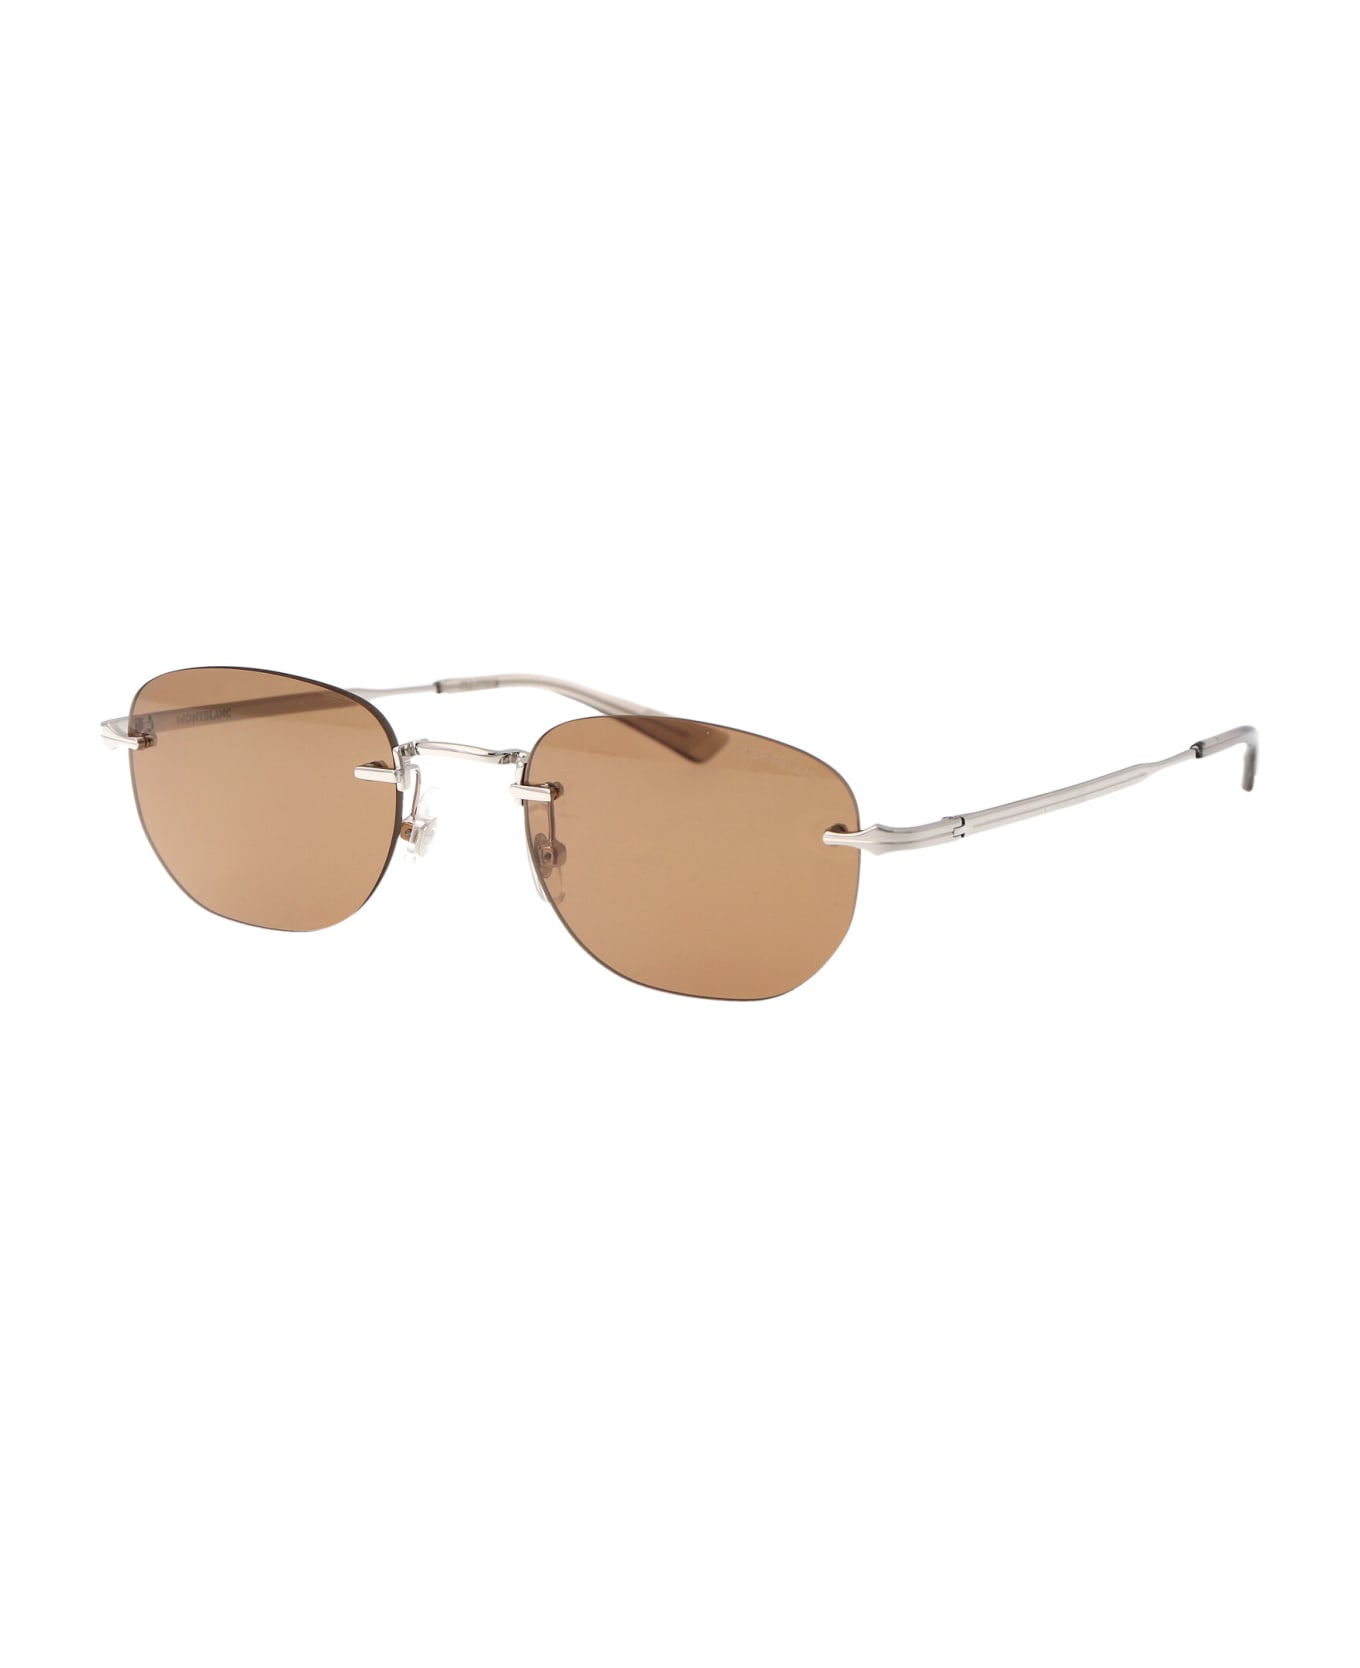 Montblanc Mb0303s Sunglasses - 003 SILVER SILVER BROWN